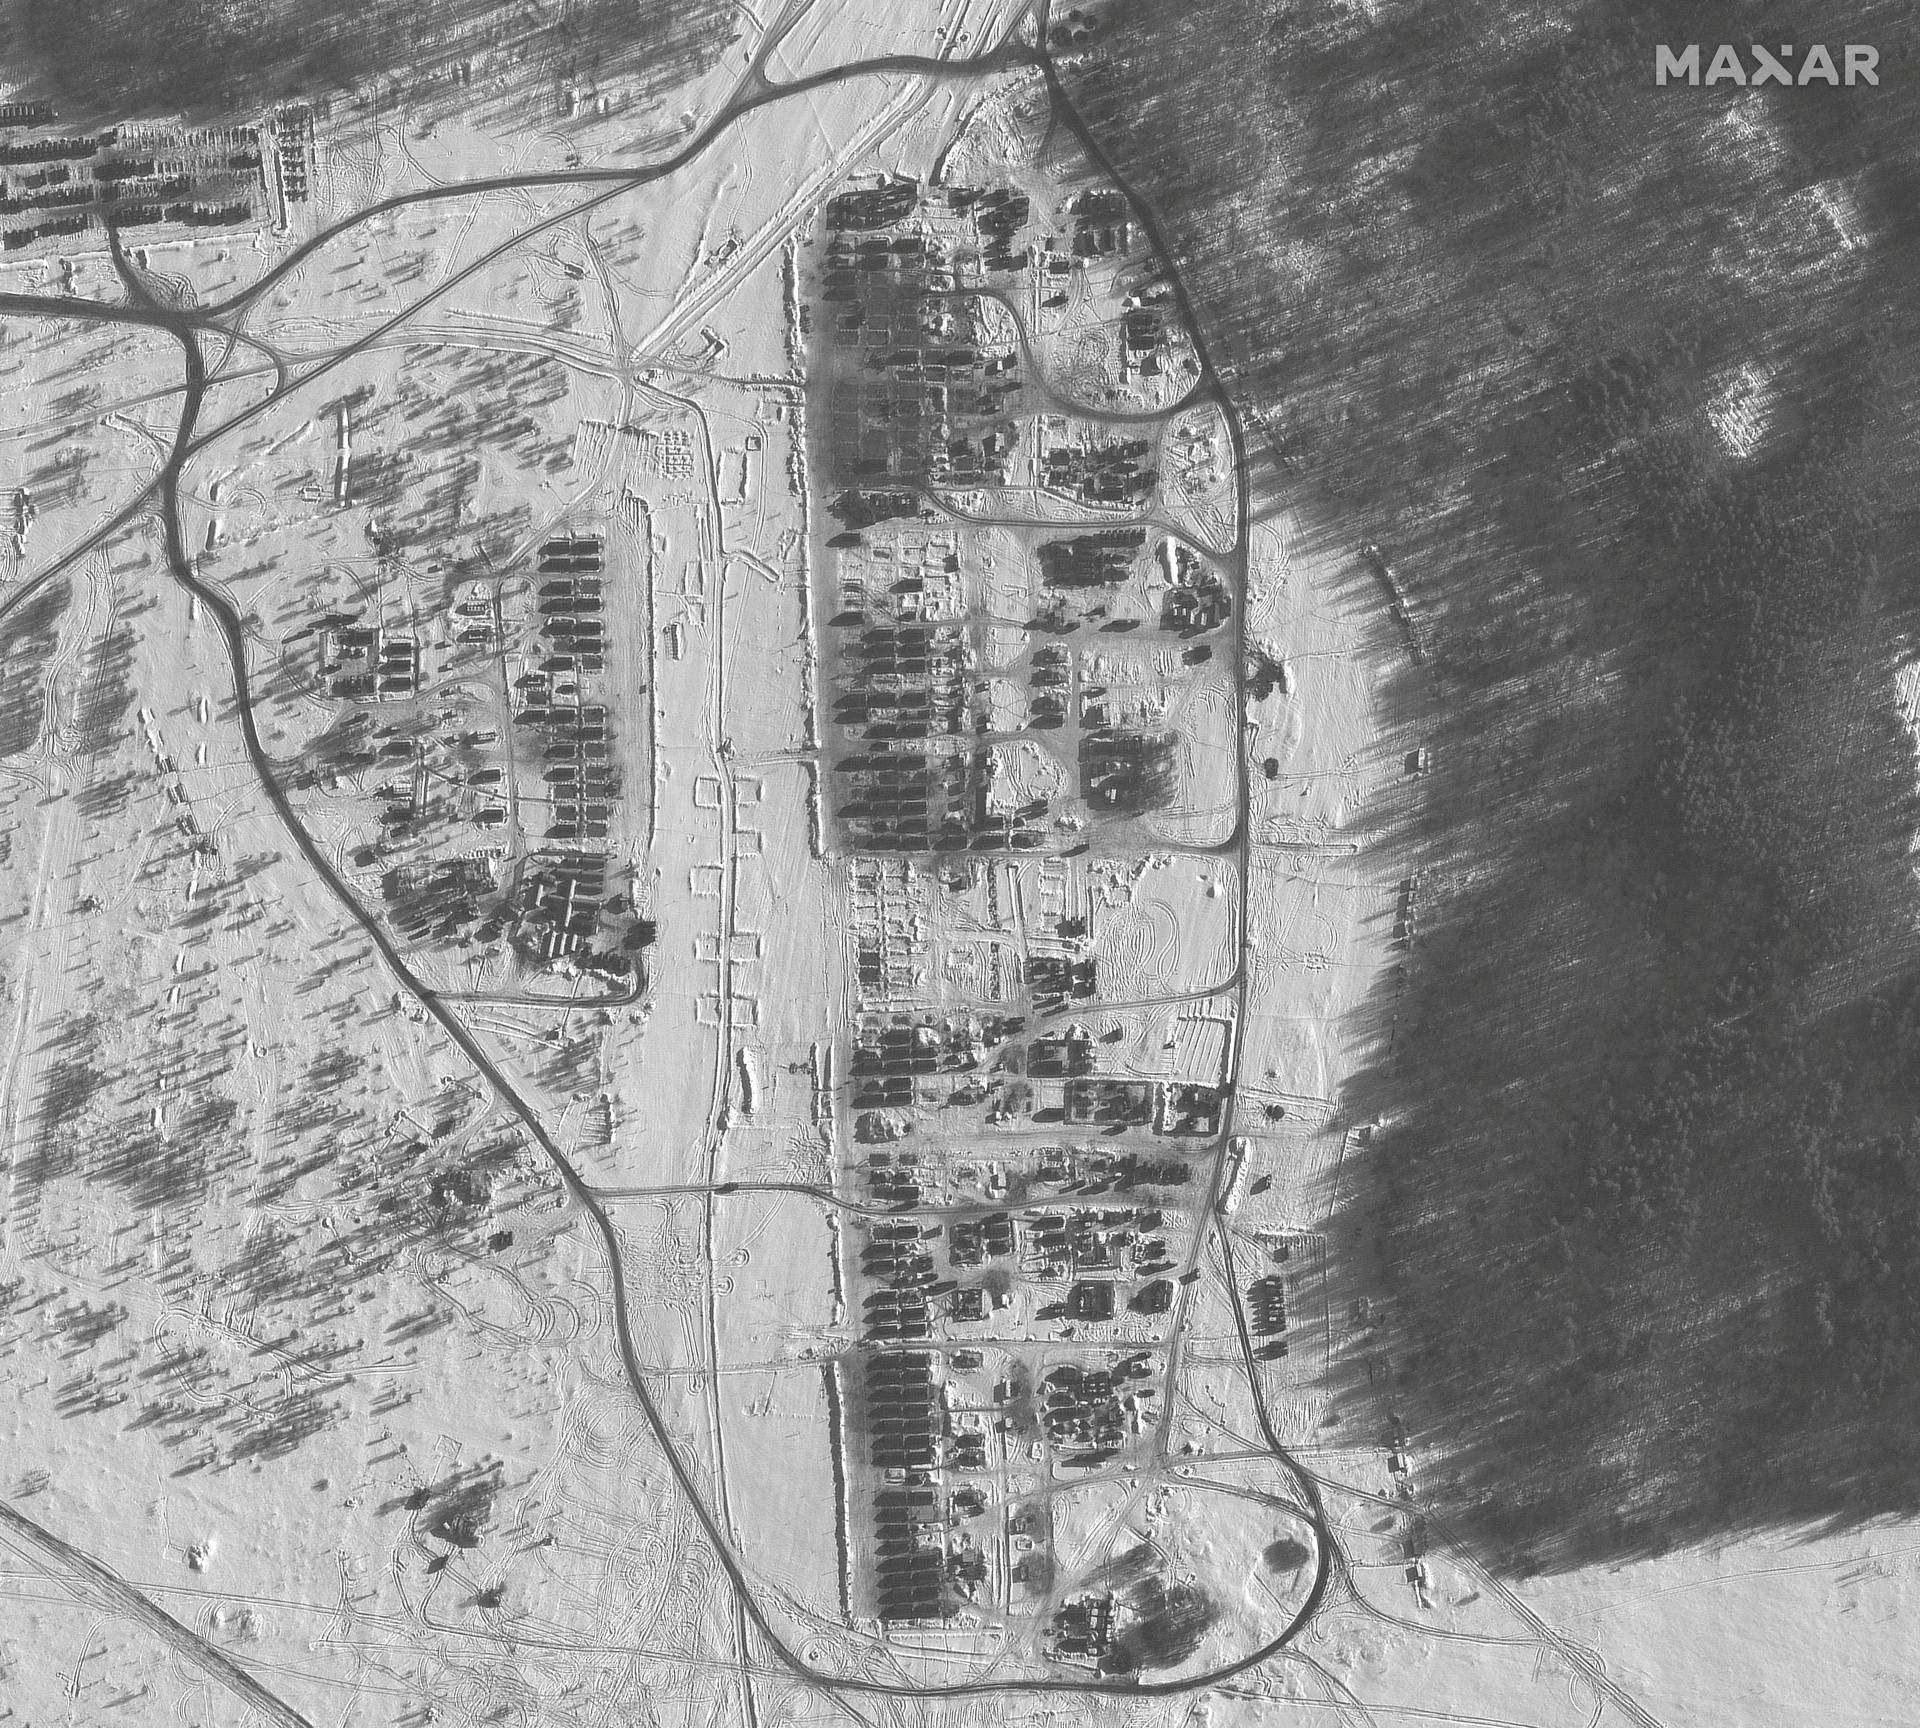 A satellite image shows deployment of troop housing area and military equipments in Yelnya